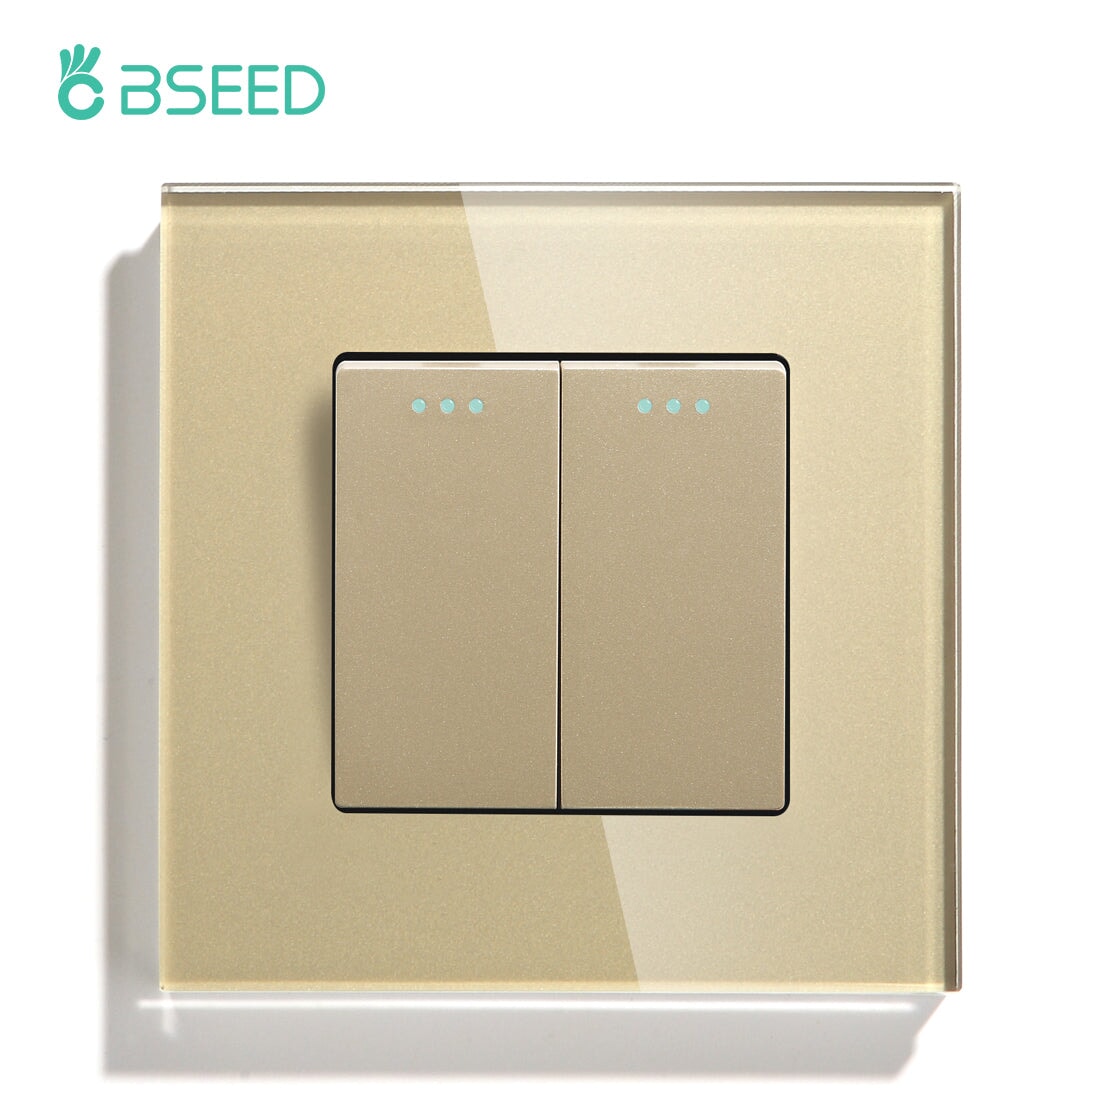 BSEED Wall Switches Automatic Rebound 1/2Gang 1Way Glass Mechanical Light Switches Reset Switches Return to Initial Position Light Switches Bseedswitch Golden 2Gang 